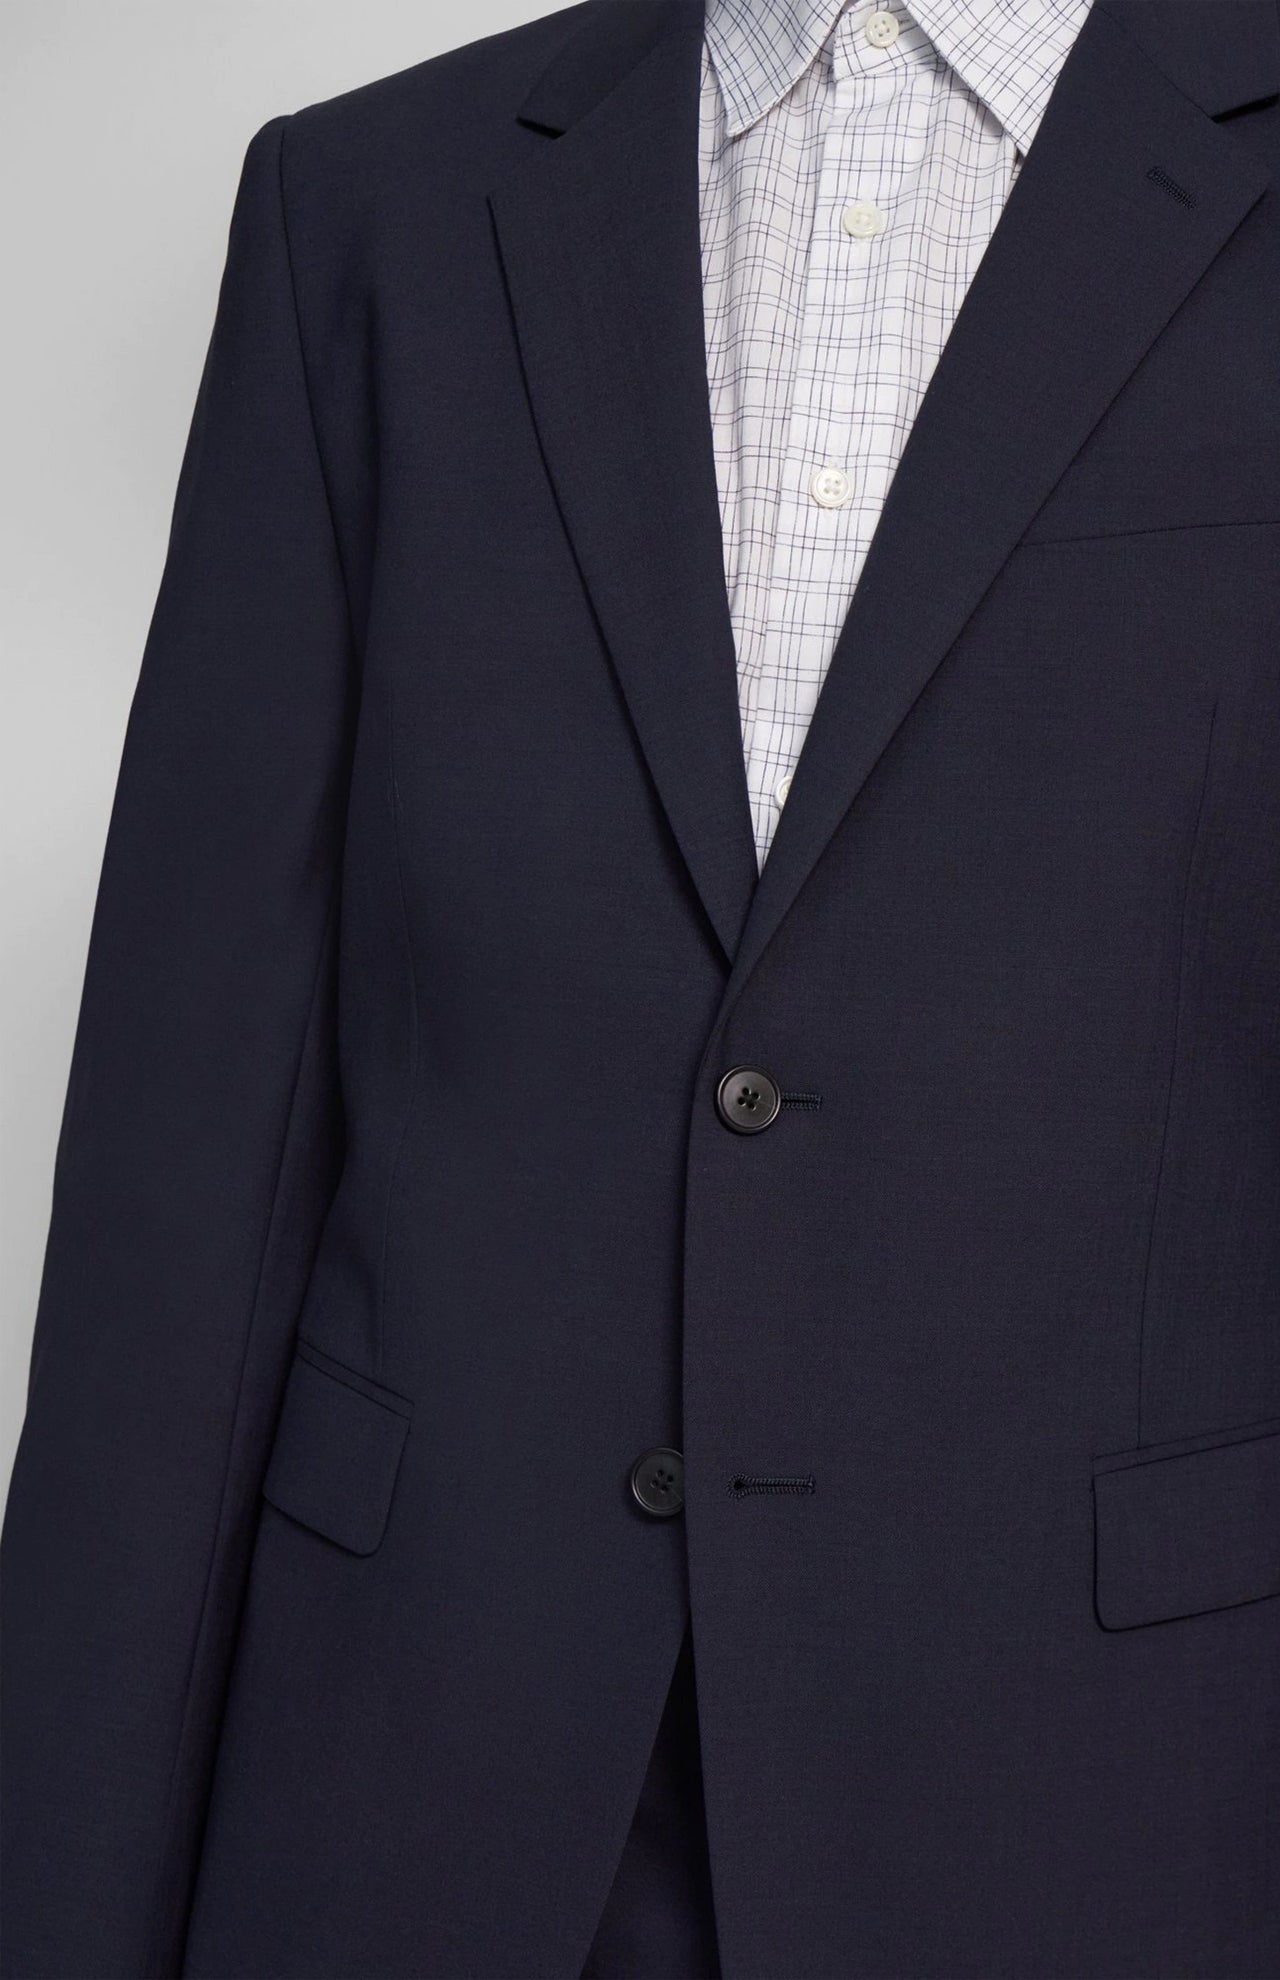 Theory Chambers New Tailor 2 Suit Jacket Navy Close Up Model Image (1737077162099)